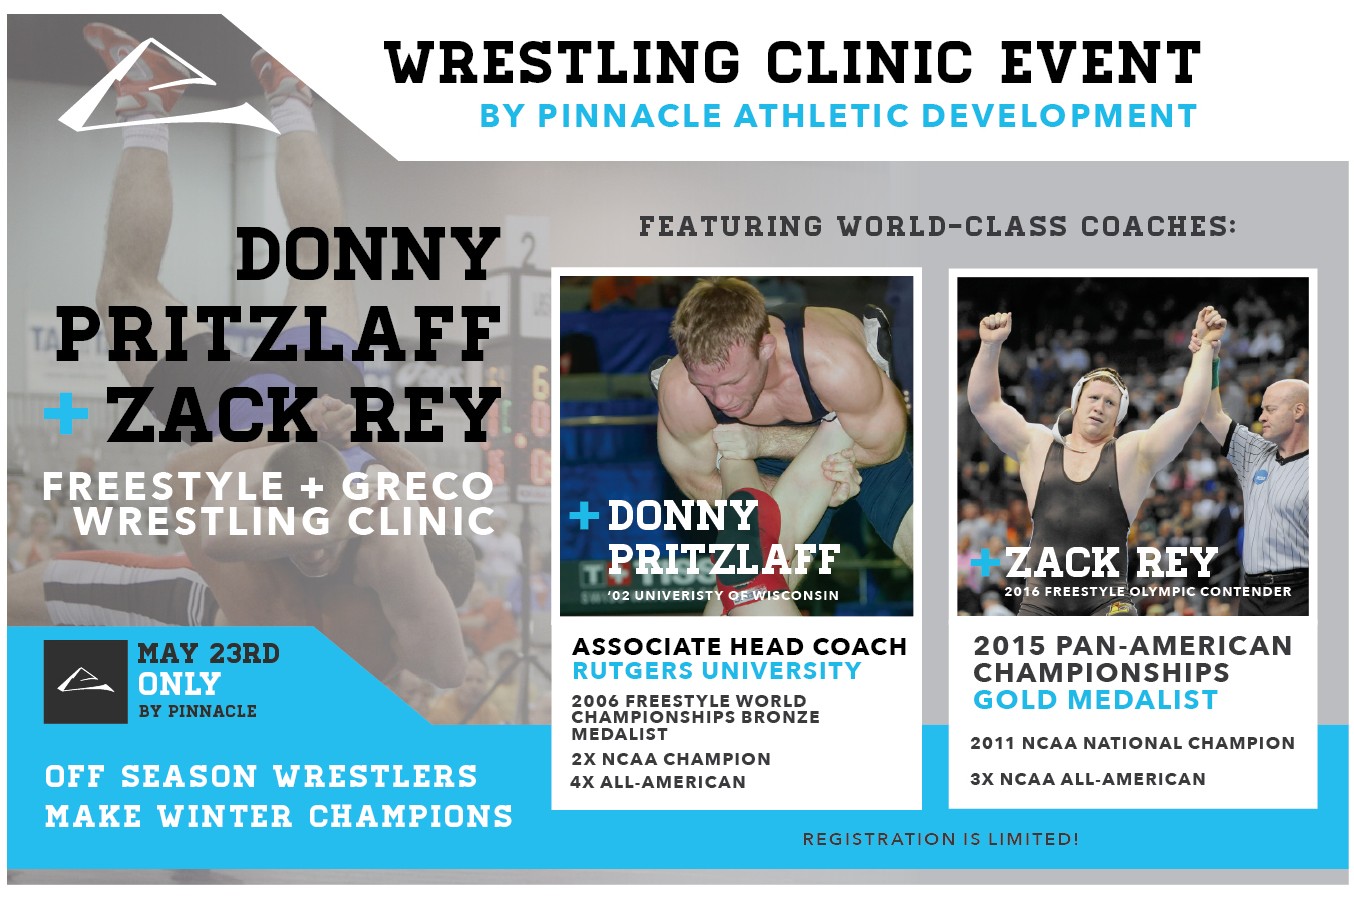 Pritzlaff and Rey Wrestling Clinic by Pinnacle